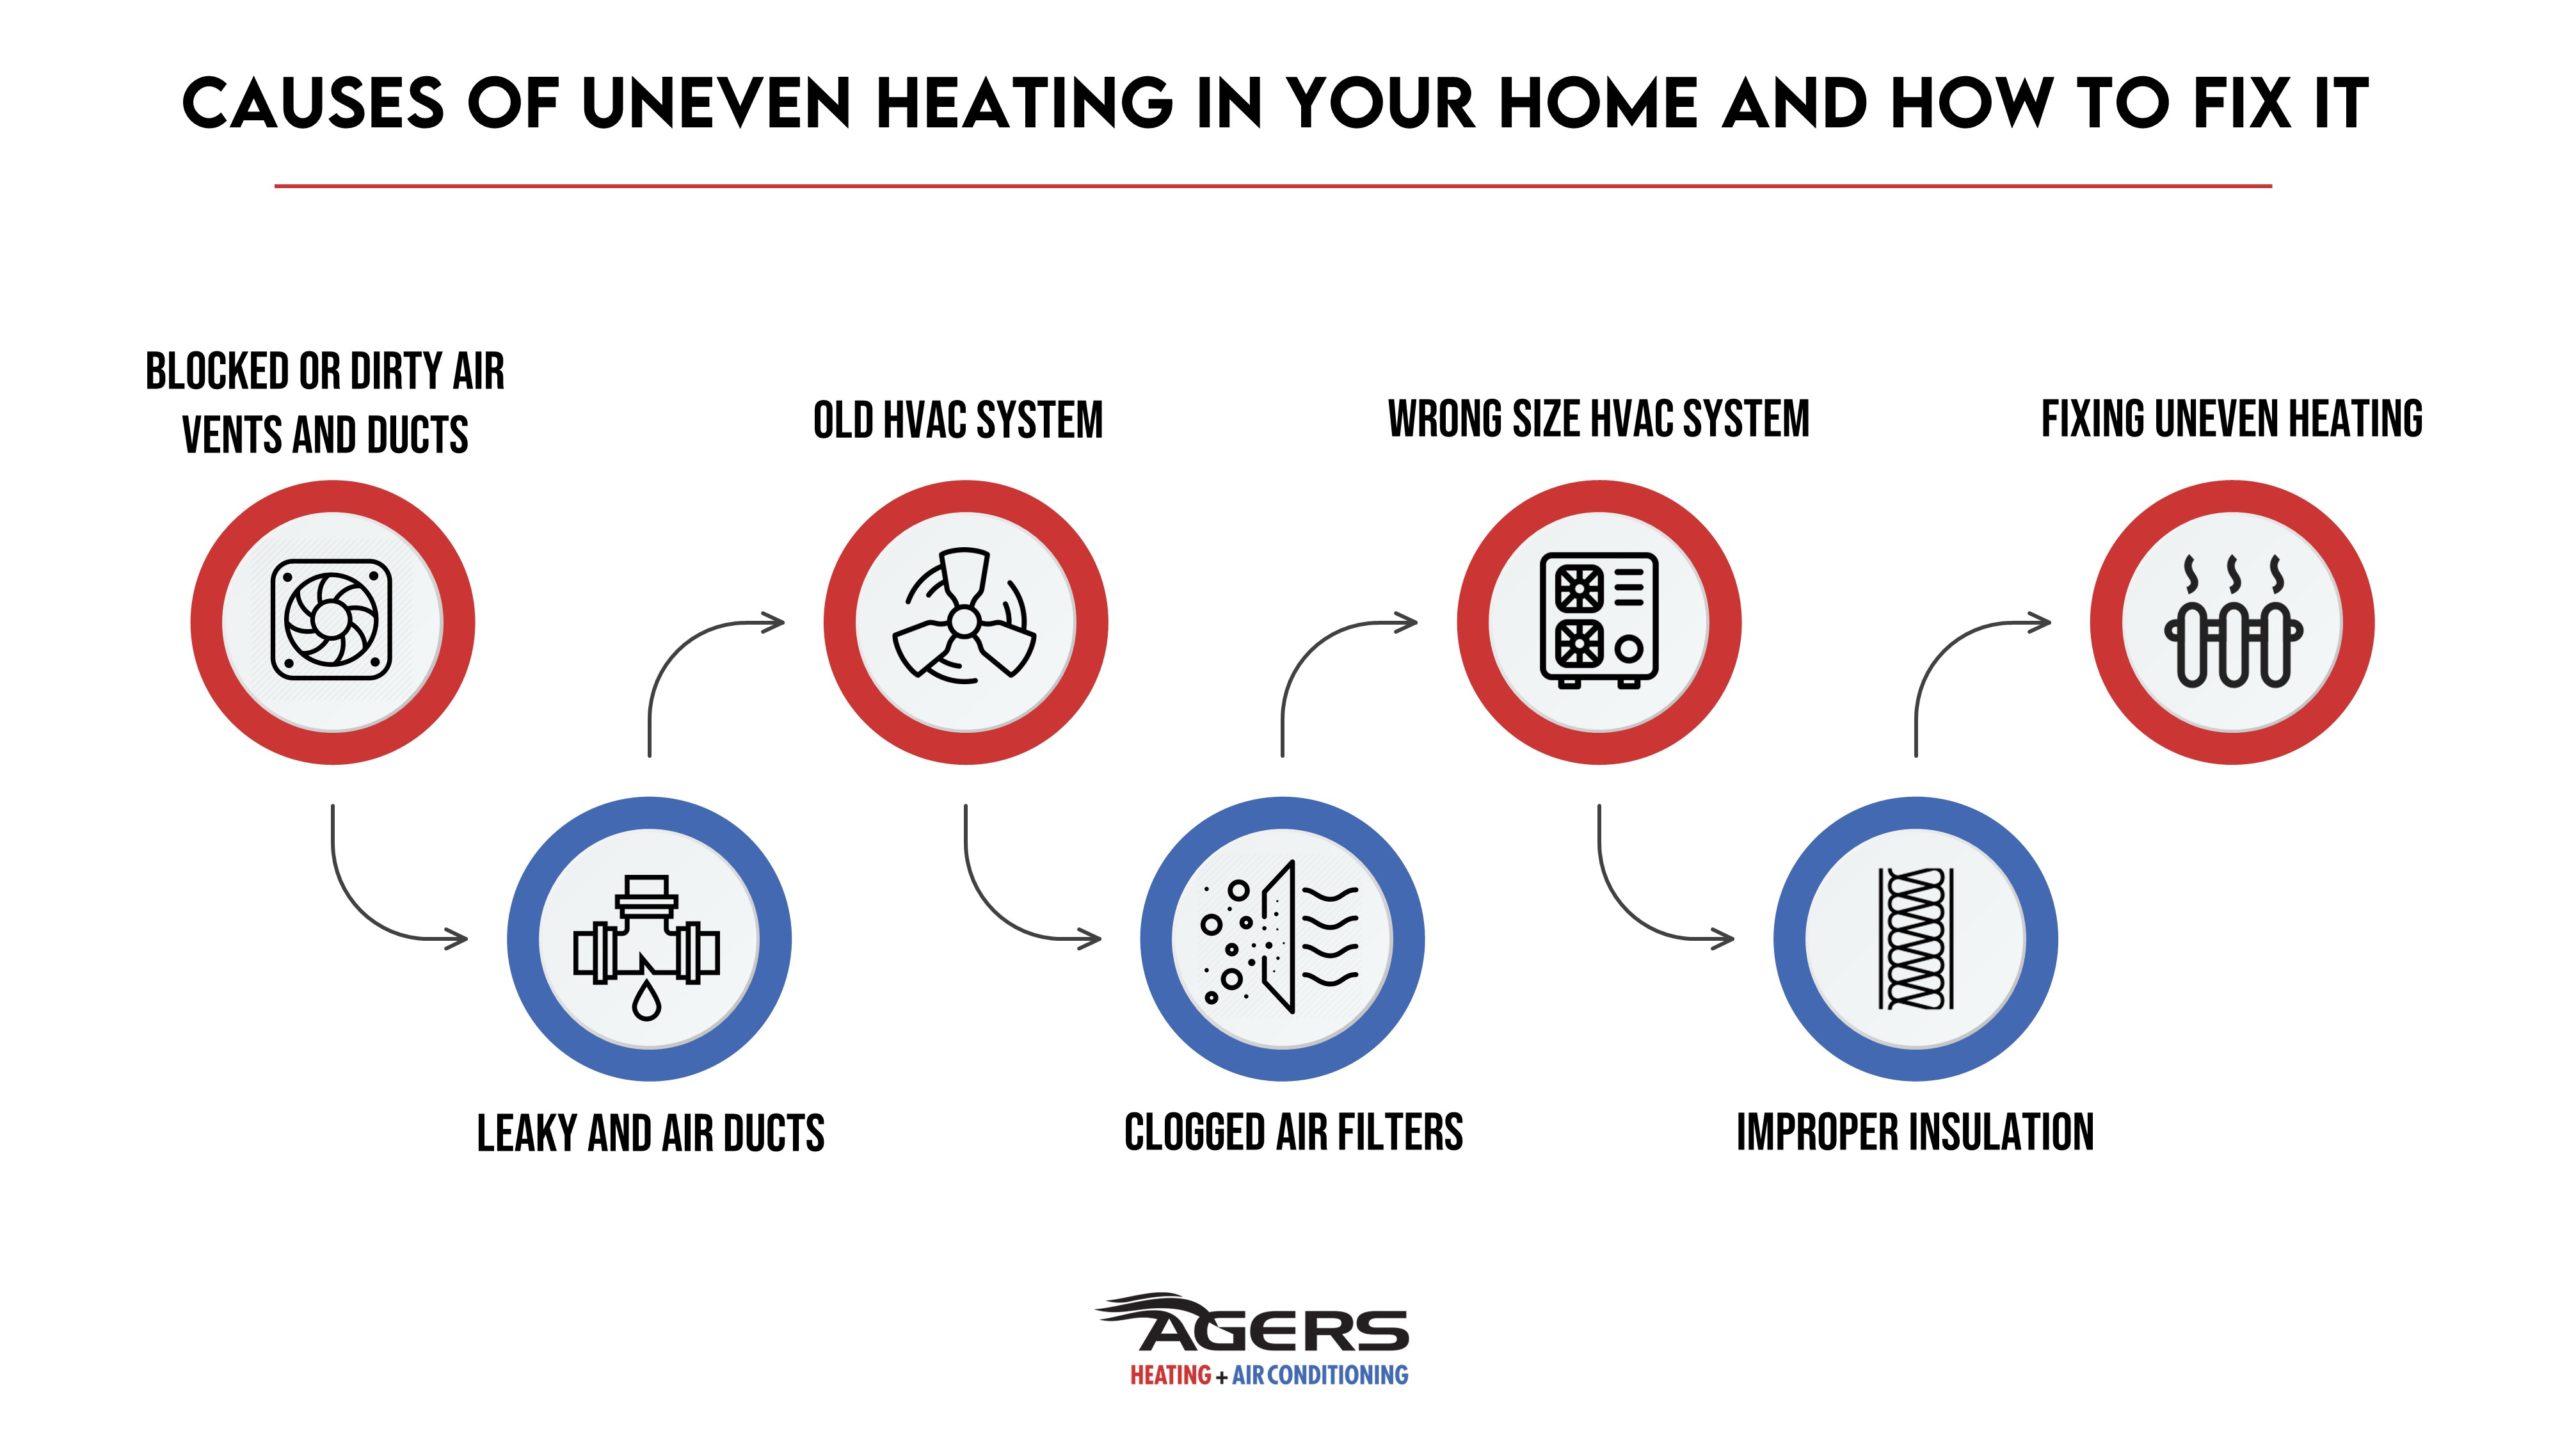 Causes of Uneven Heating in Your Home and How to Fix It